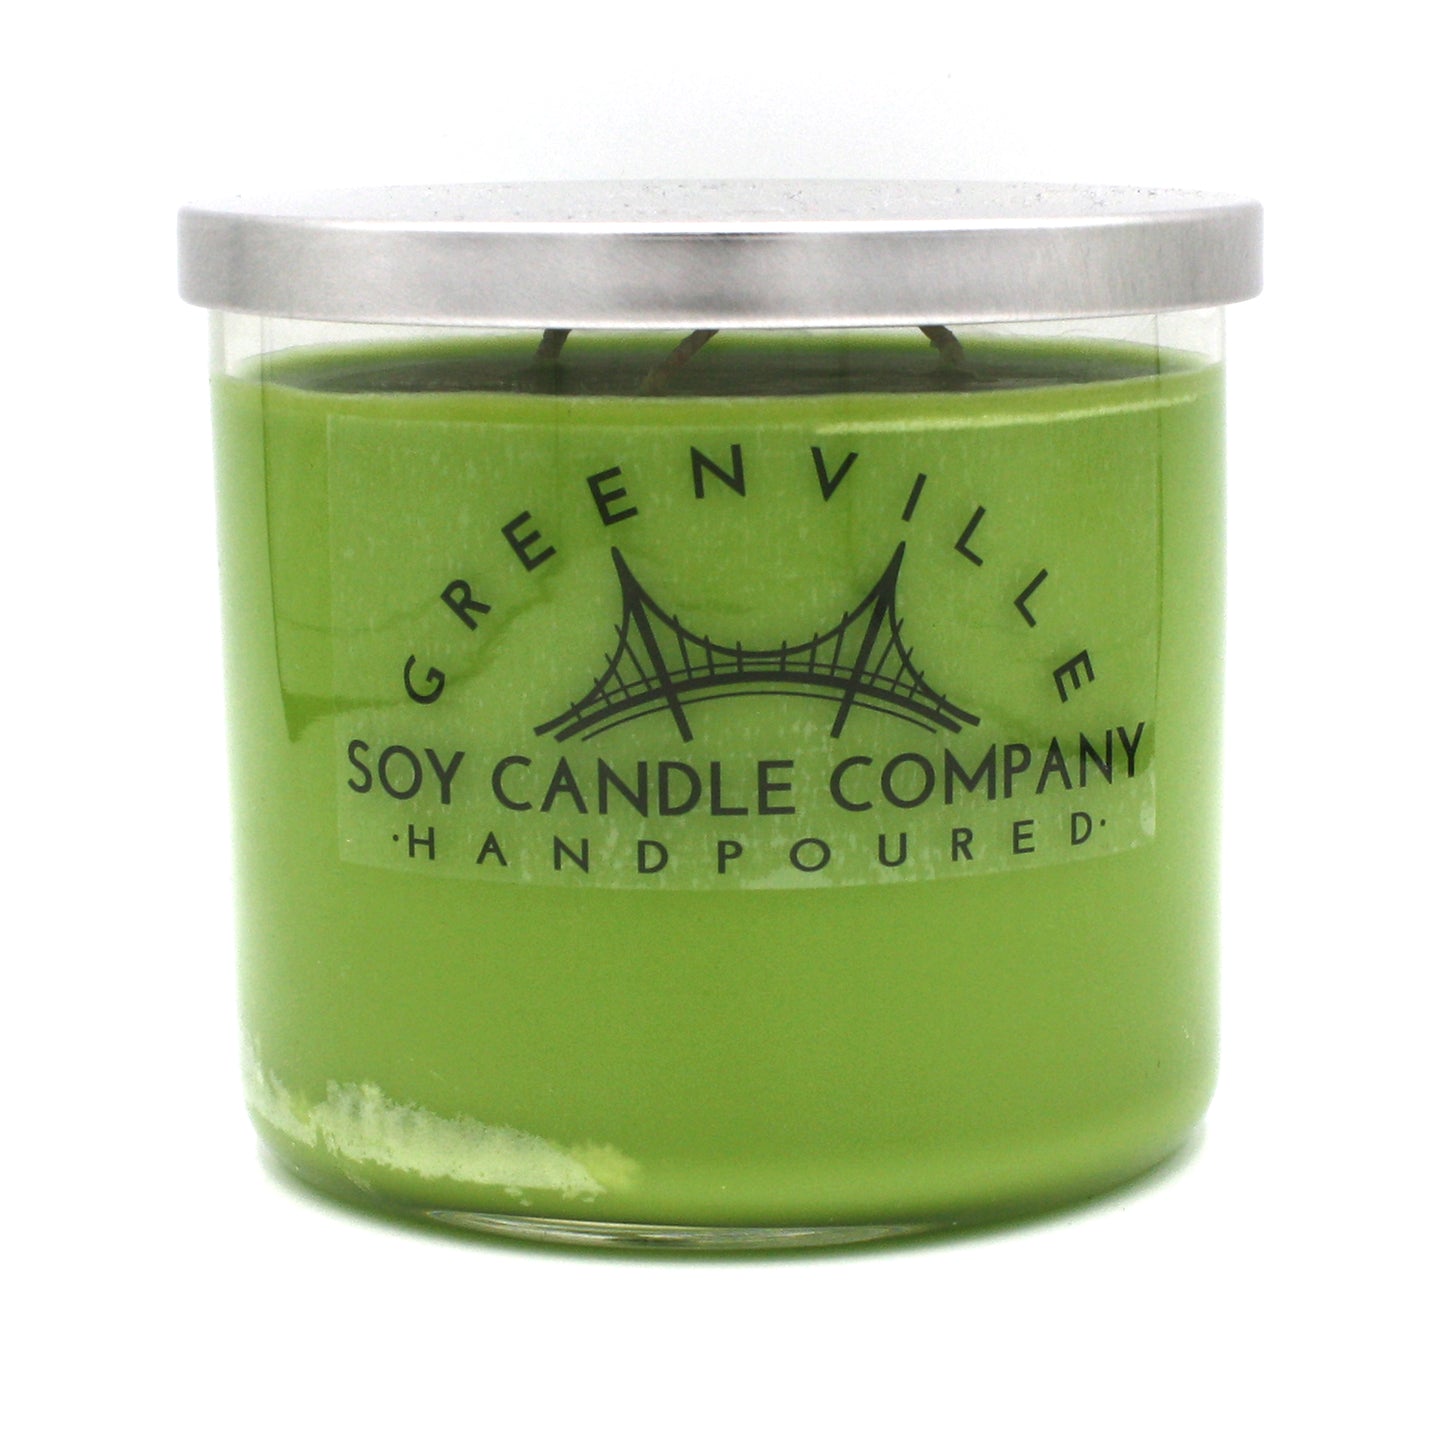 Absinthe at Midnight, 18oz Soy Candle